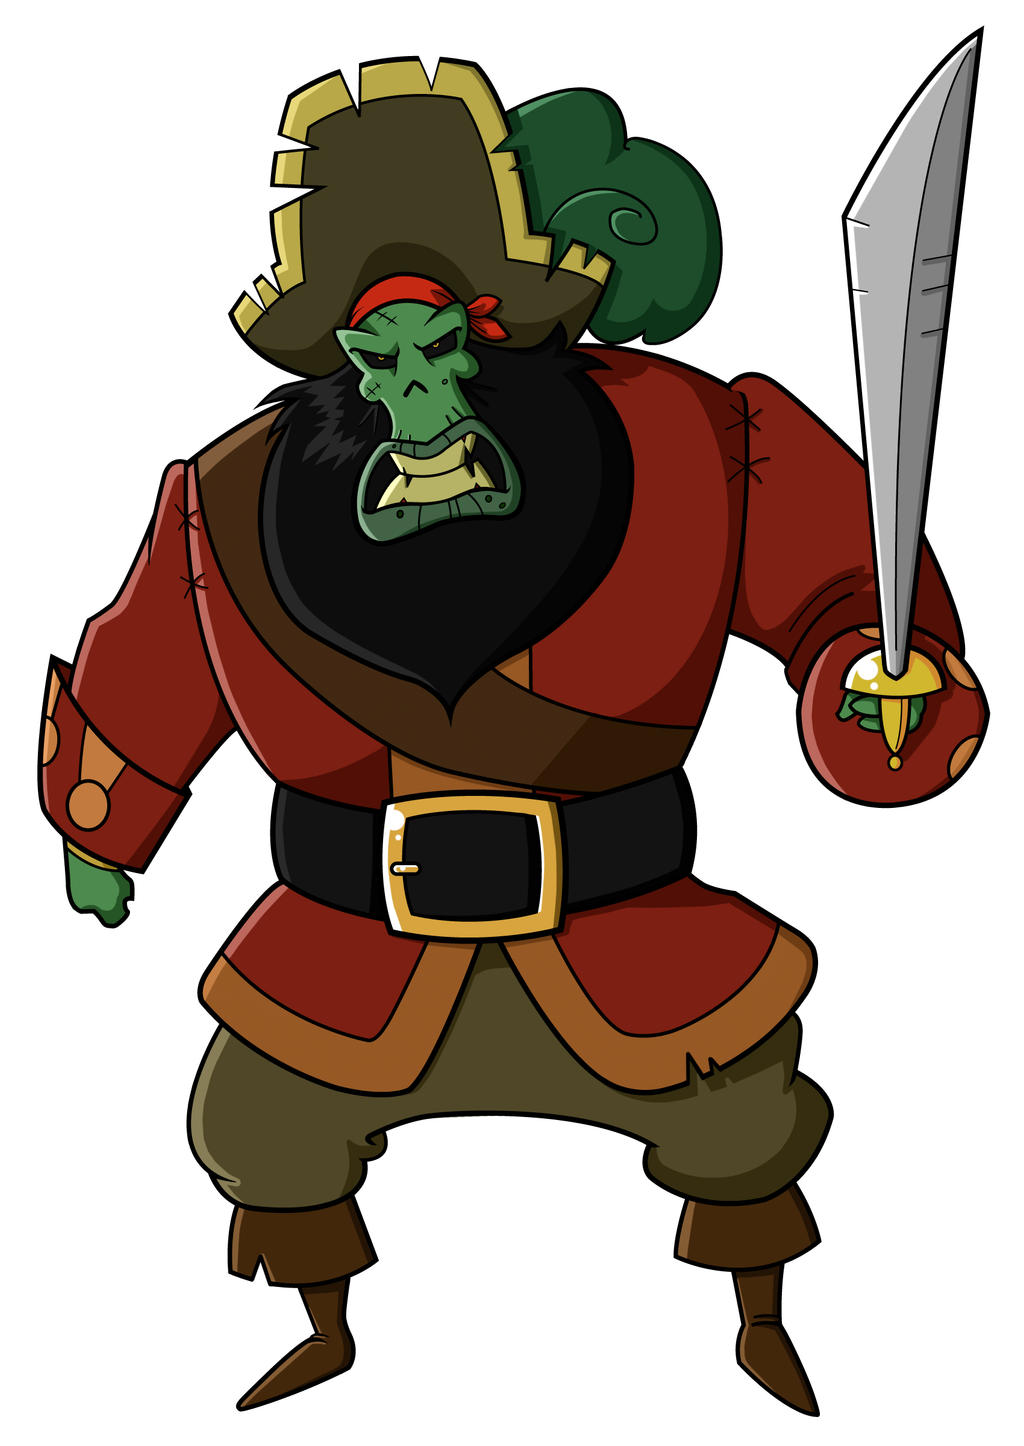 zombie_pirate_lechuck_by_laura32.jpg